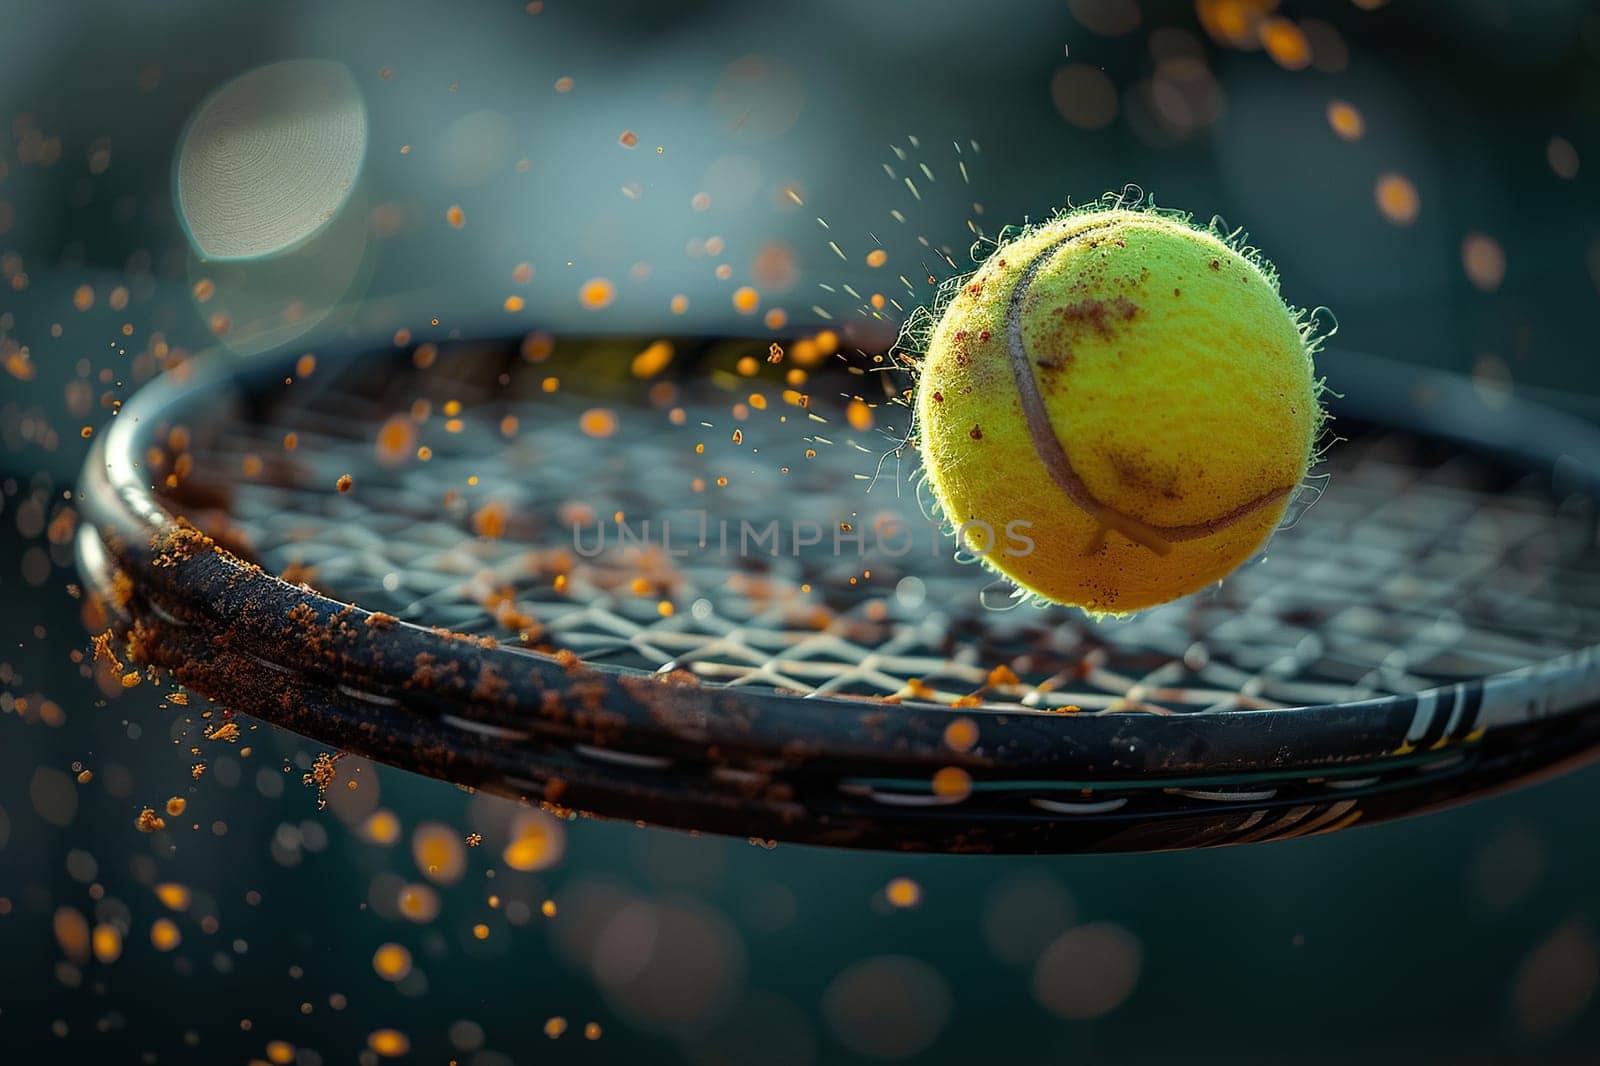 Racket and tennis ball on a blur background.